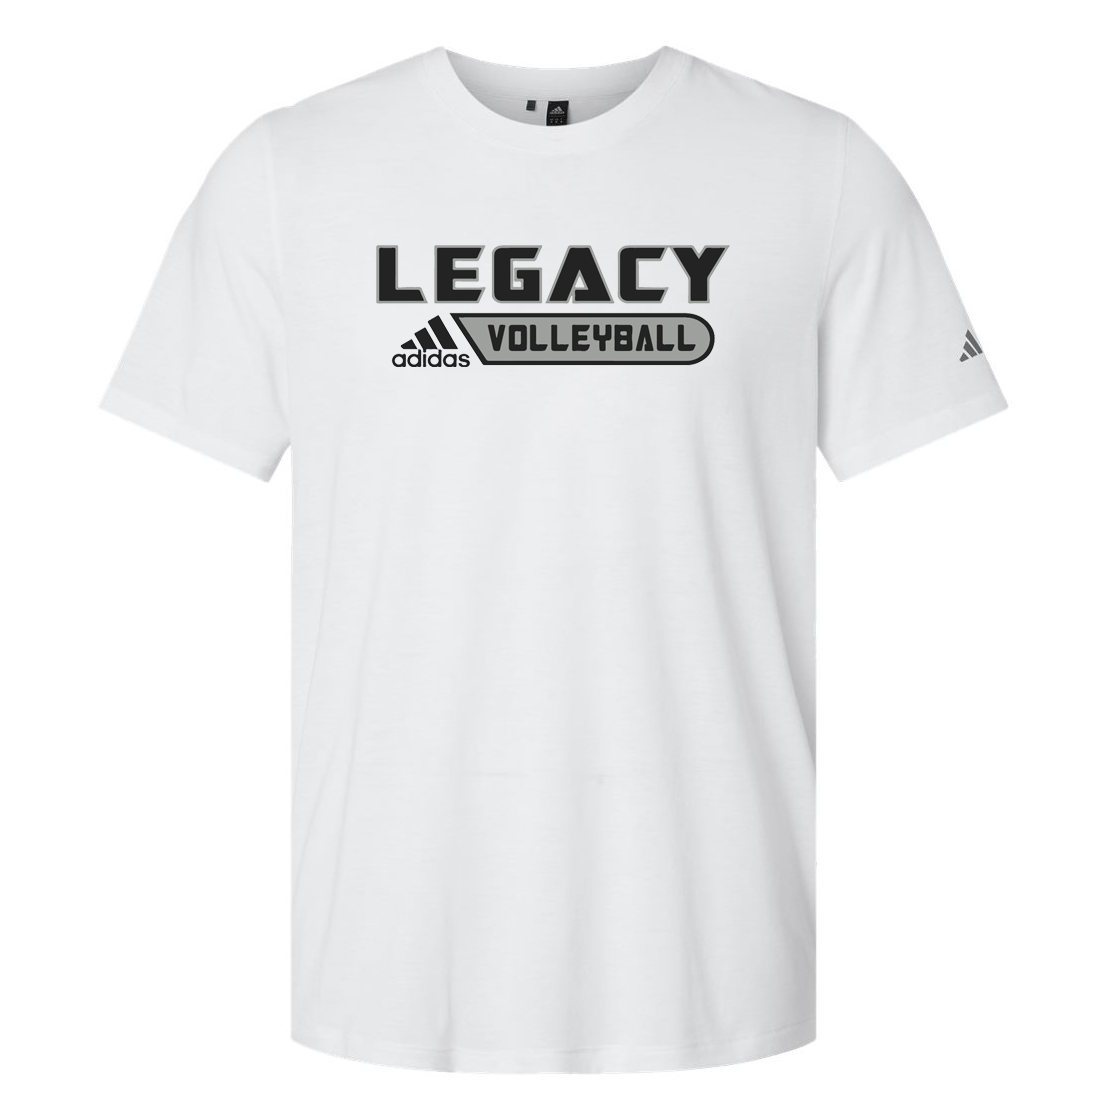 Legacy Volleyball Club Adidas Blended T-Shirt